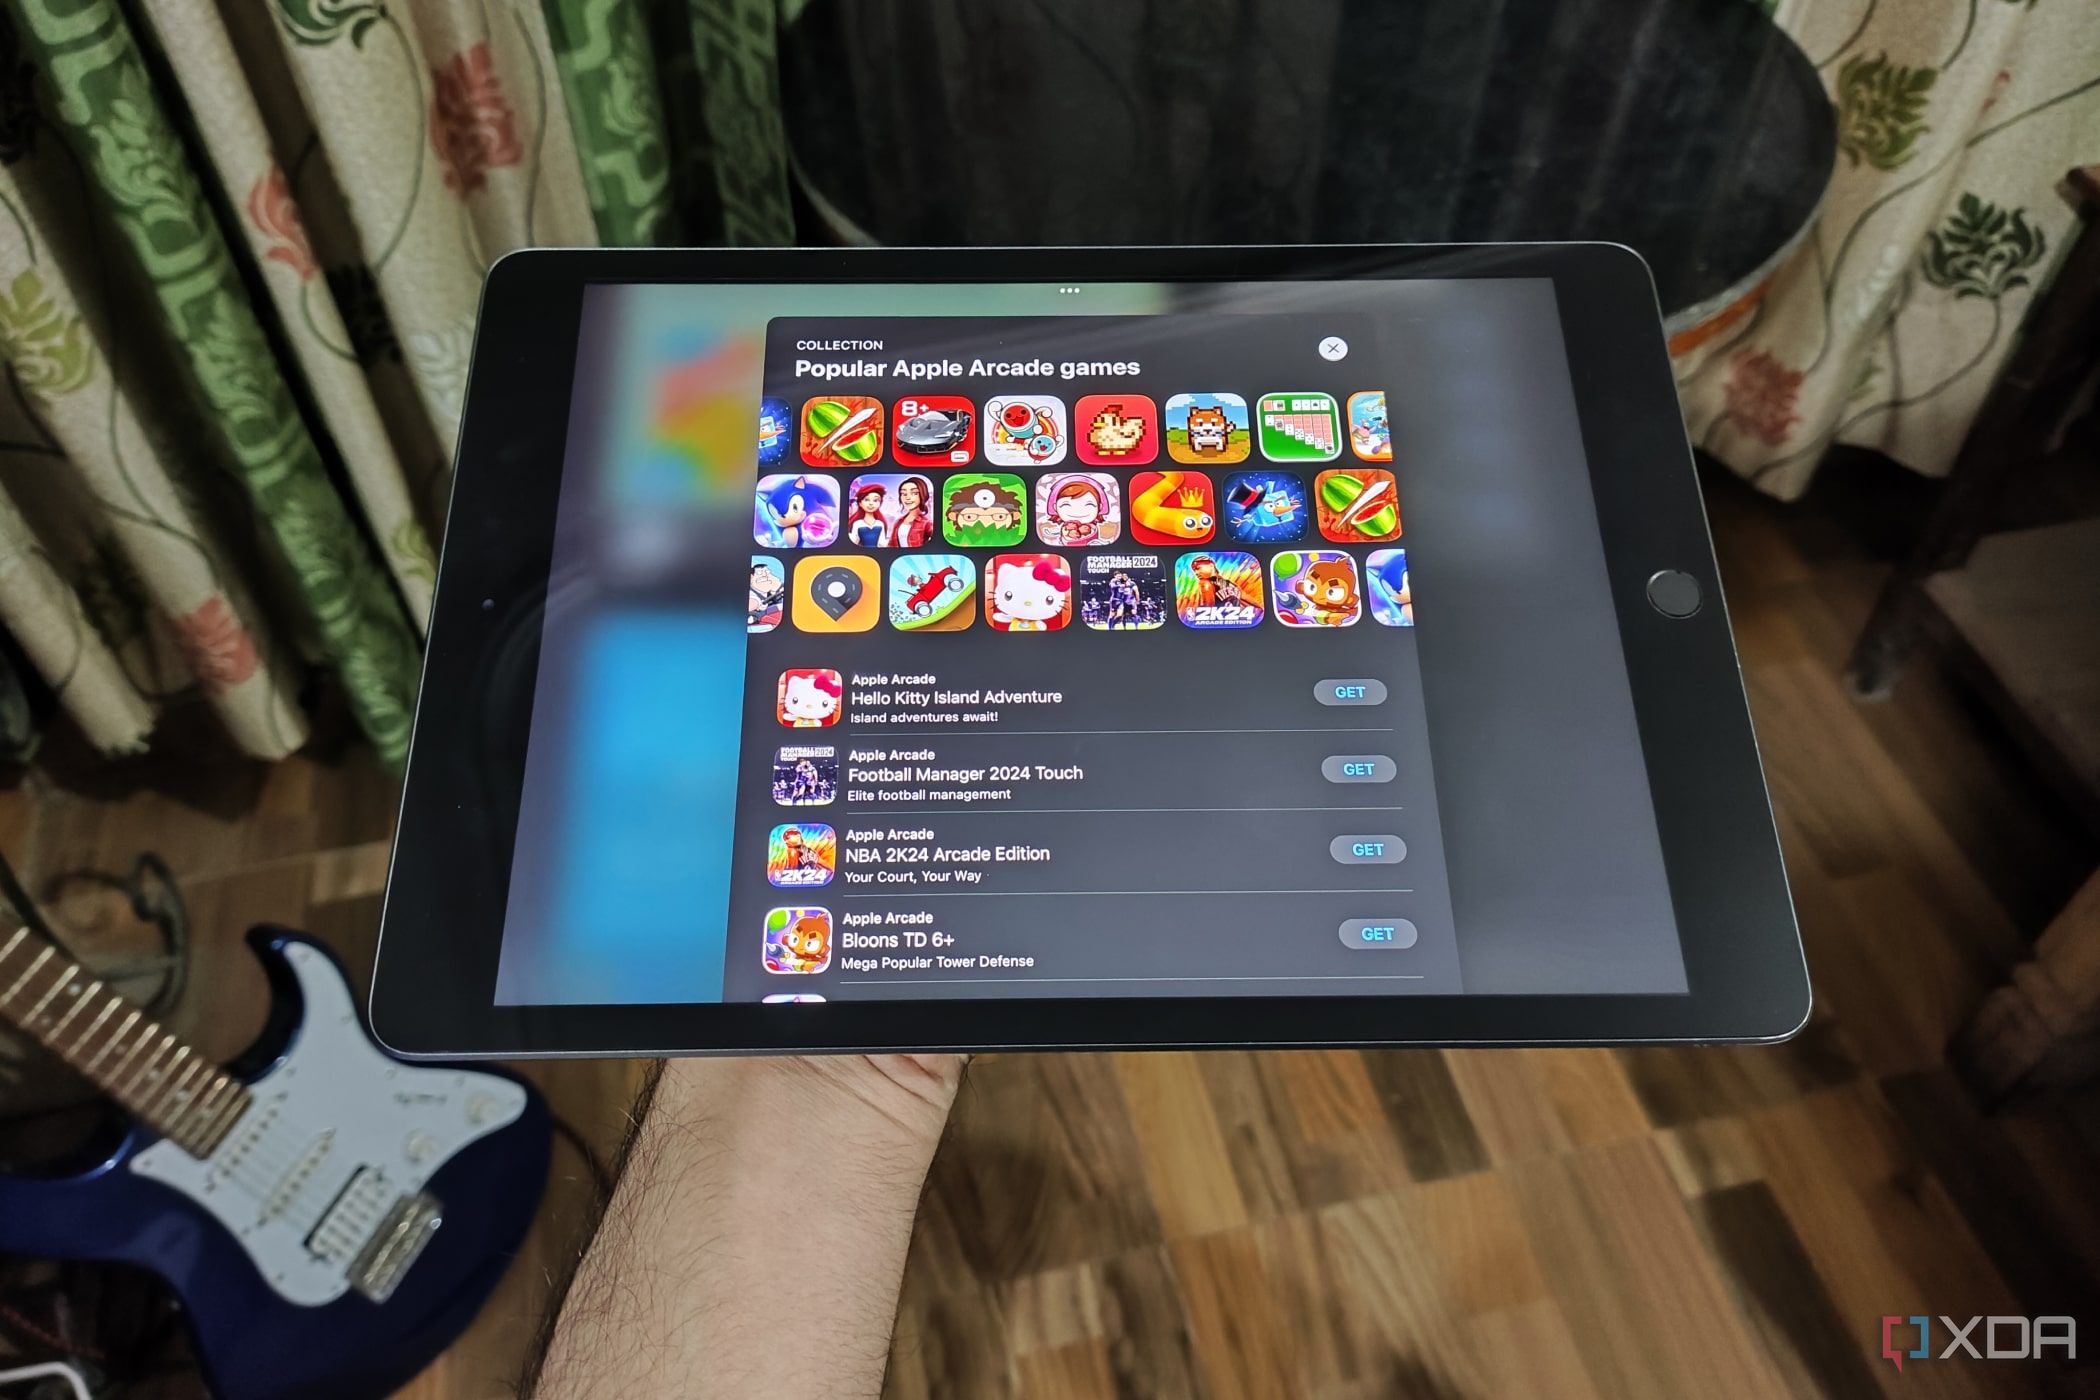 An image of the 7th-gen iPad with the App Store open